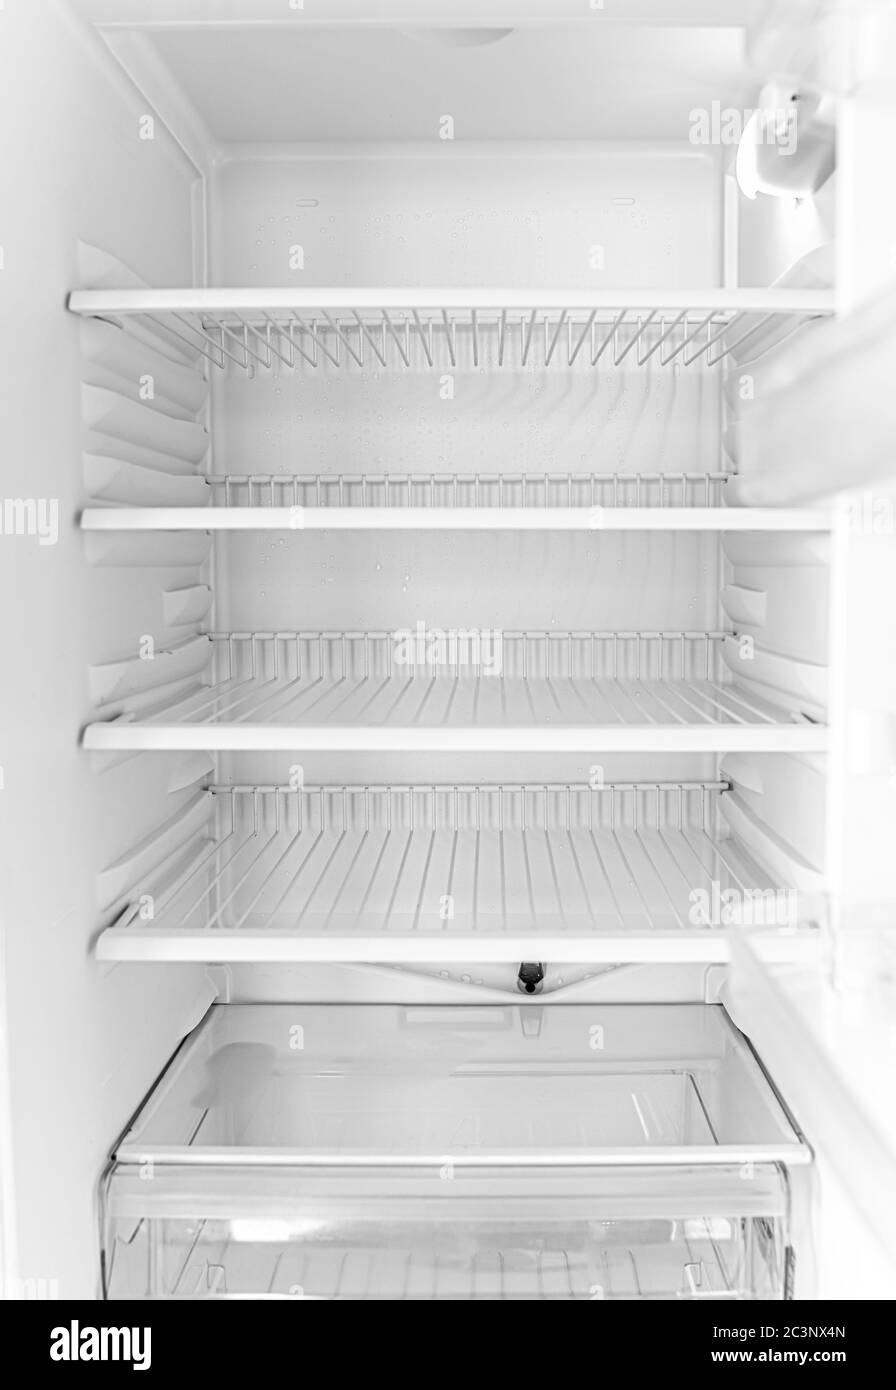 Defrosted refrigerator without food. Empty open white fridge. Stock Photo